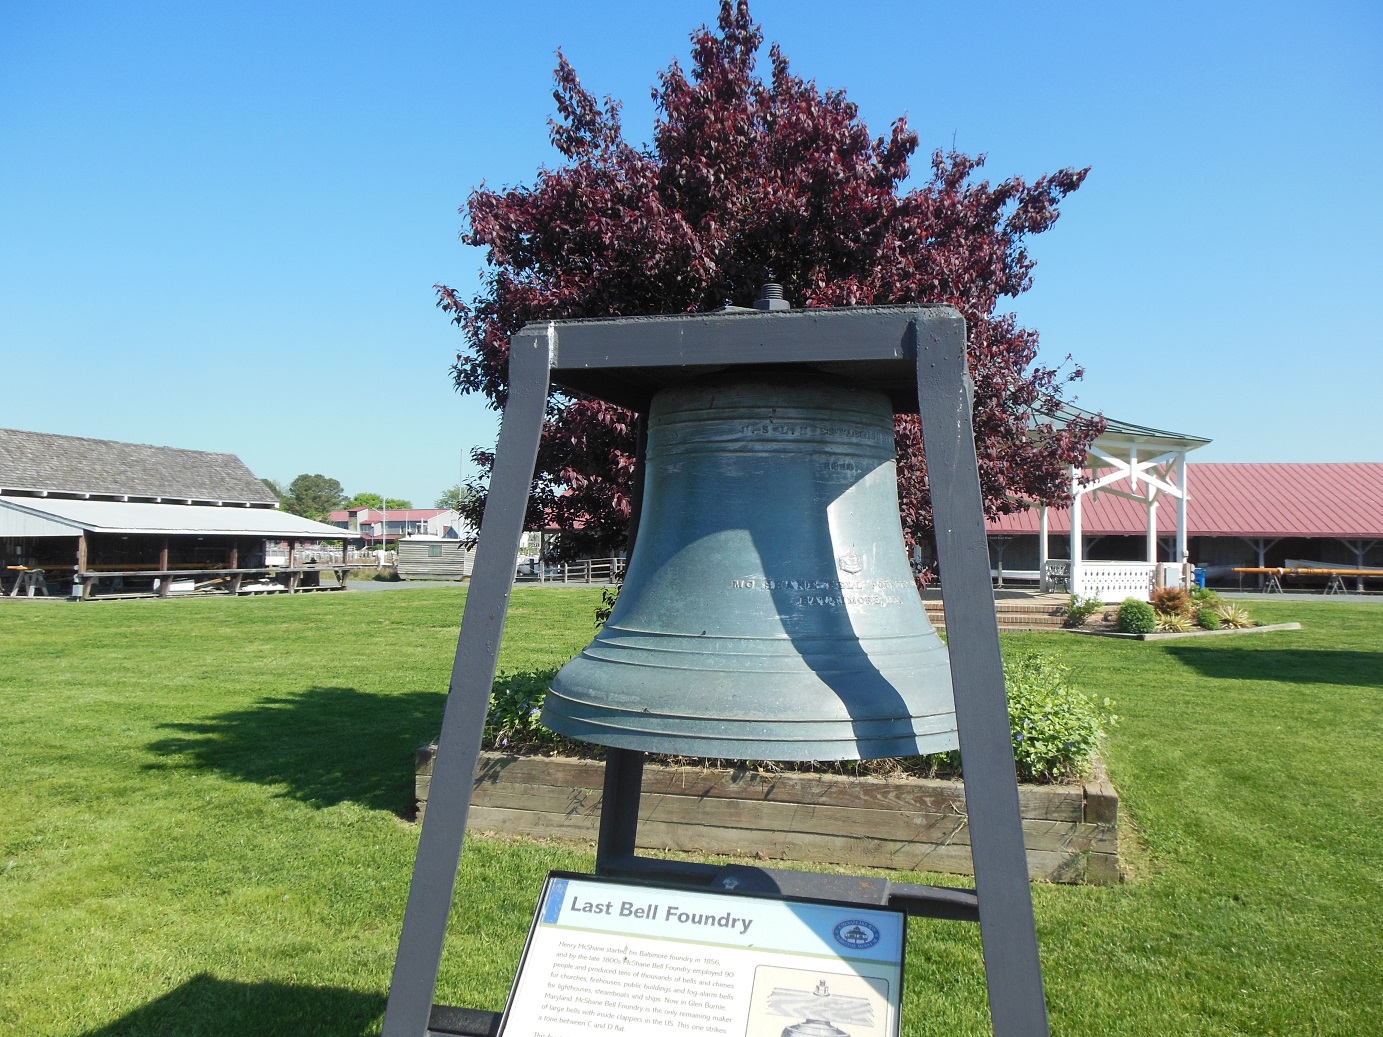 St. Michaels, Maryland: A bell from the last bell foundry in Baltimore. On Nov. 11, 2018, bells across Maryland with be sounded as part of the Bells of Peace WWI Armistice Day commemoration. (Anthony C. Hayes)